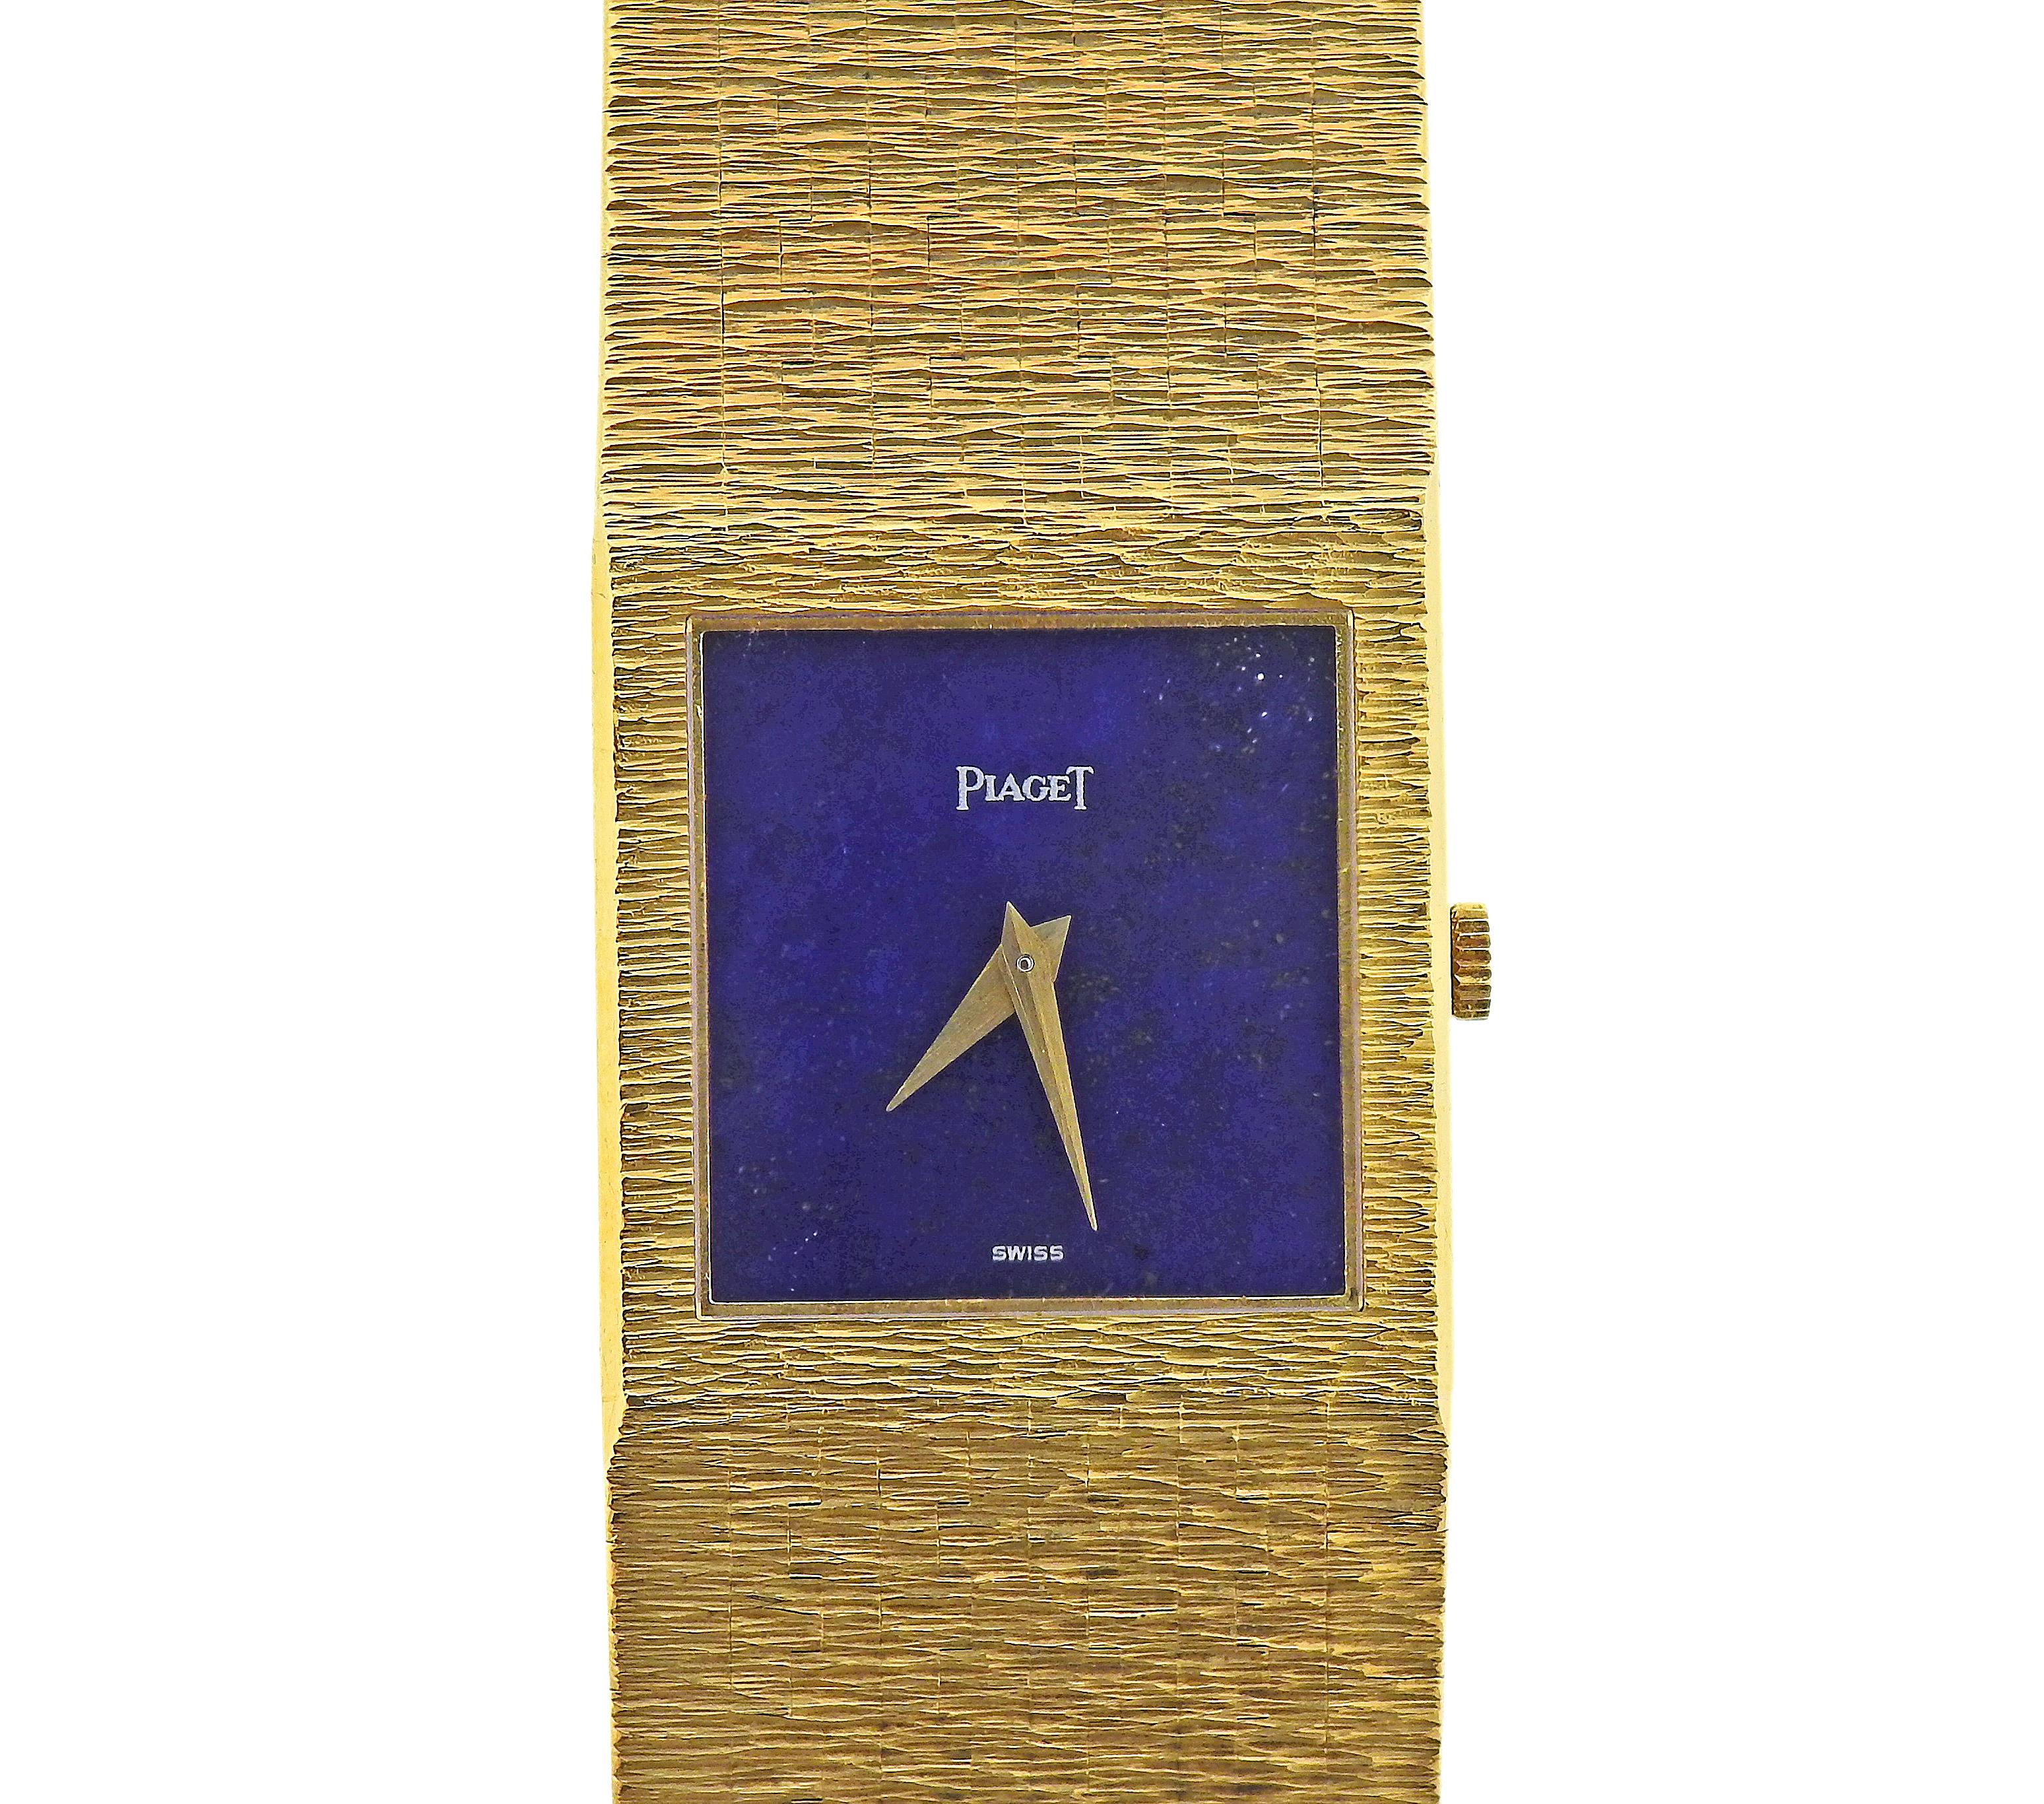 Classic 18k yellow gold Piaget watch, with lapis dial. Manual wind movement. Bracelet is 7 6/8